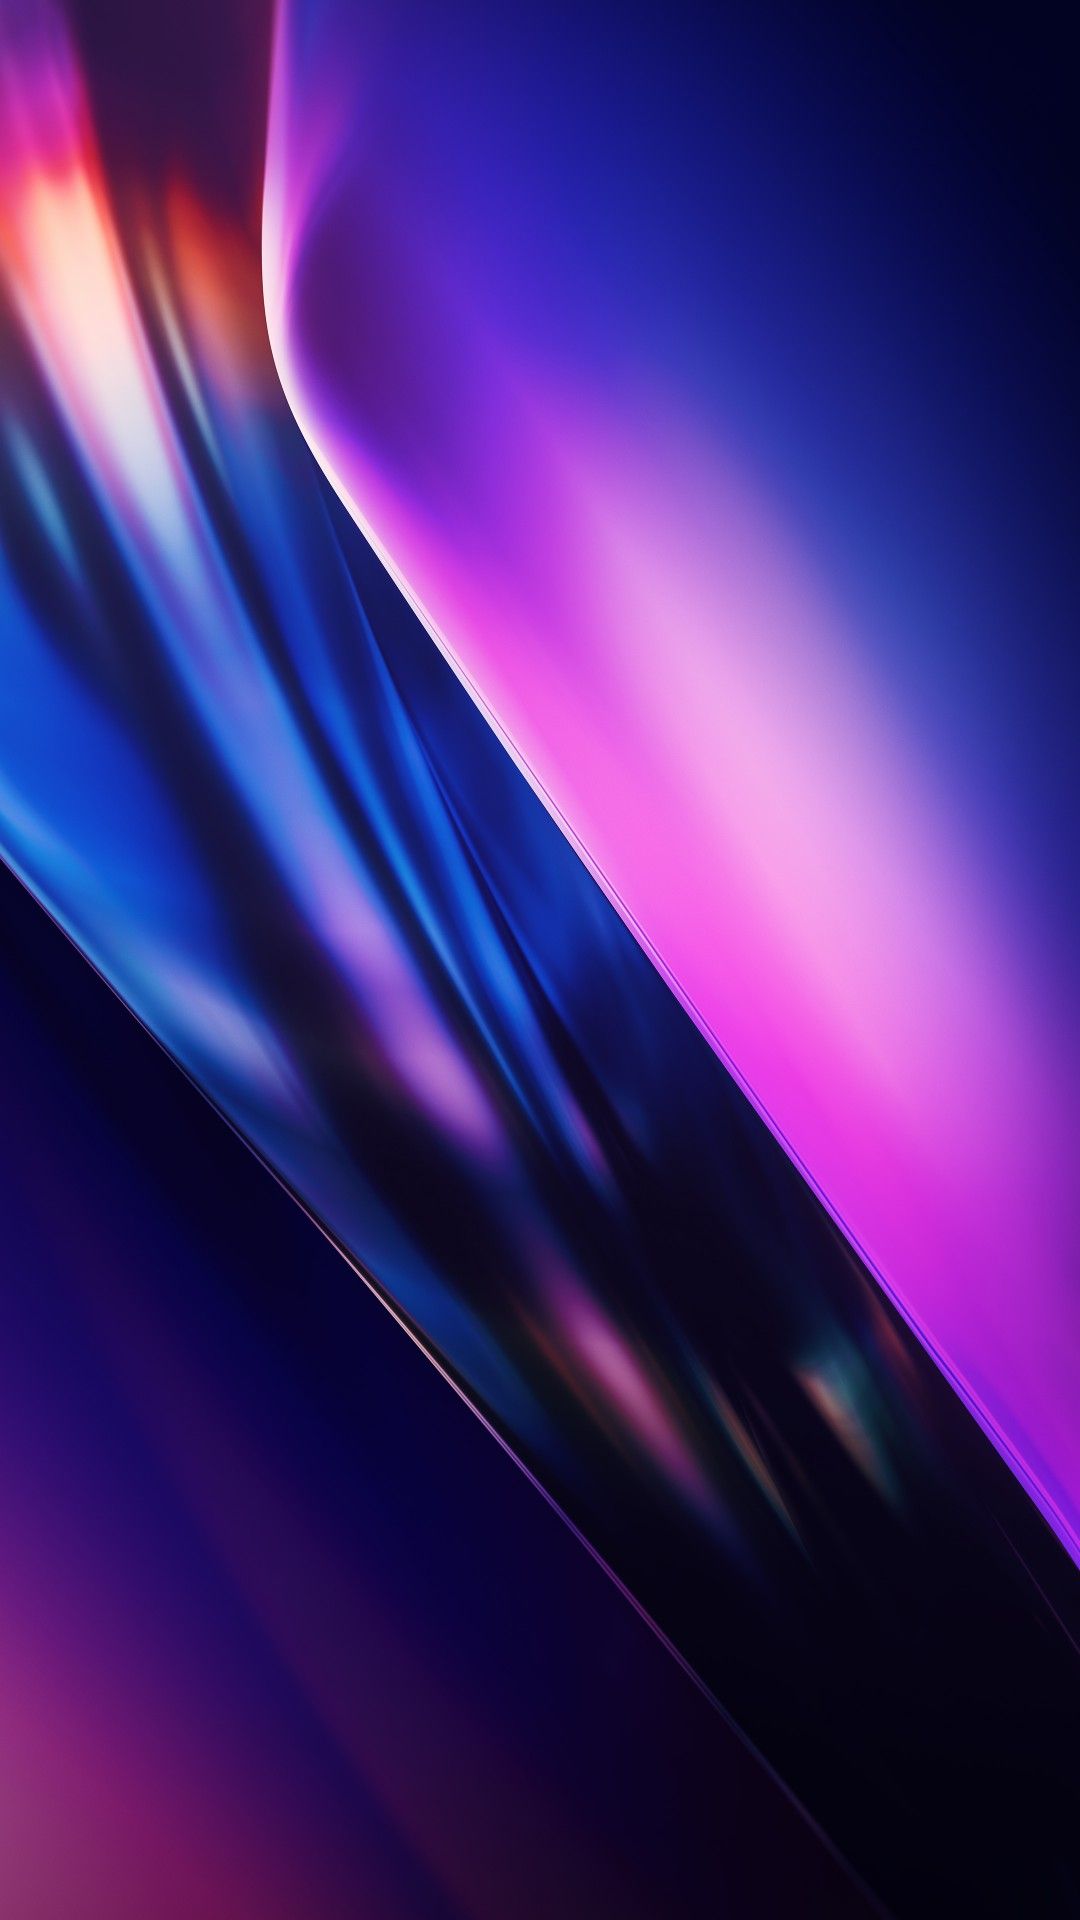 4k UHD For Android Wallpapers - Wallpaper Cave